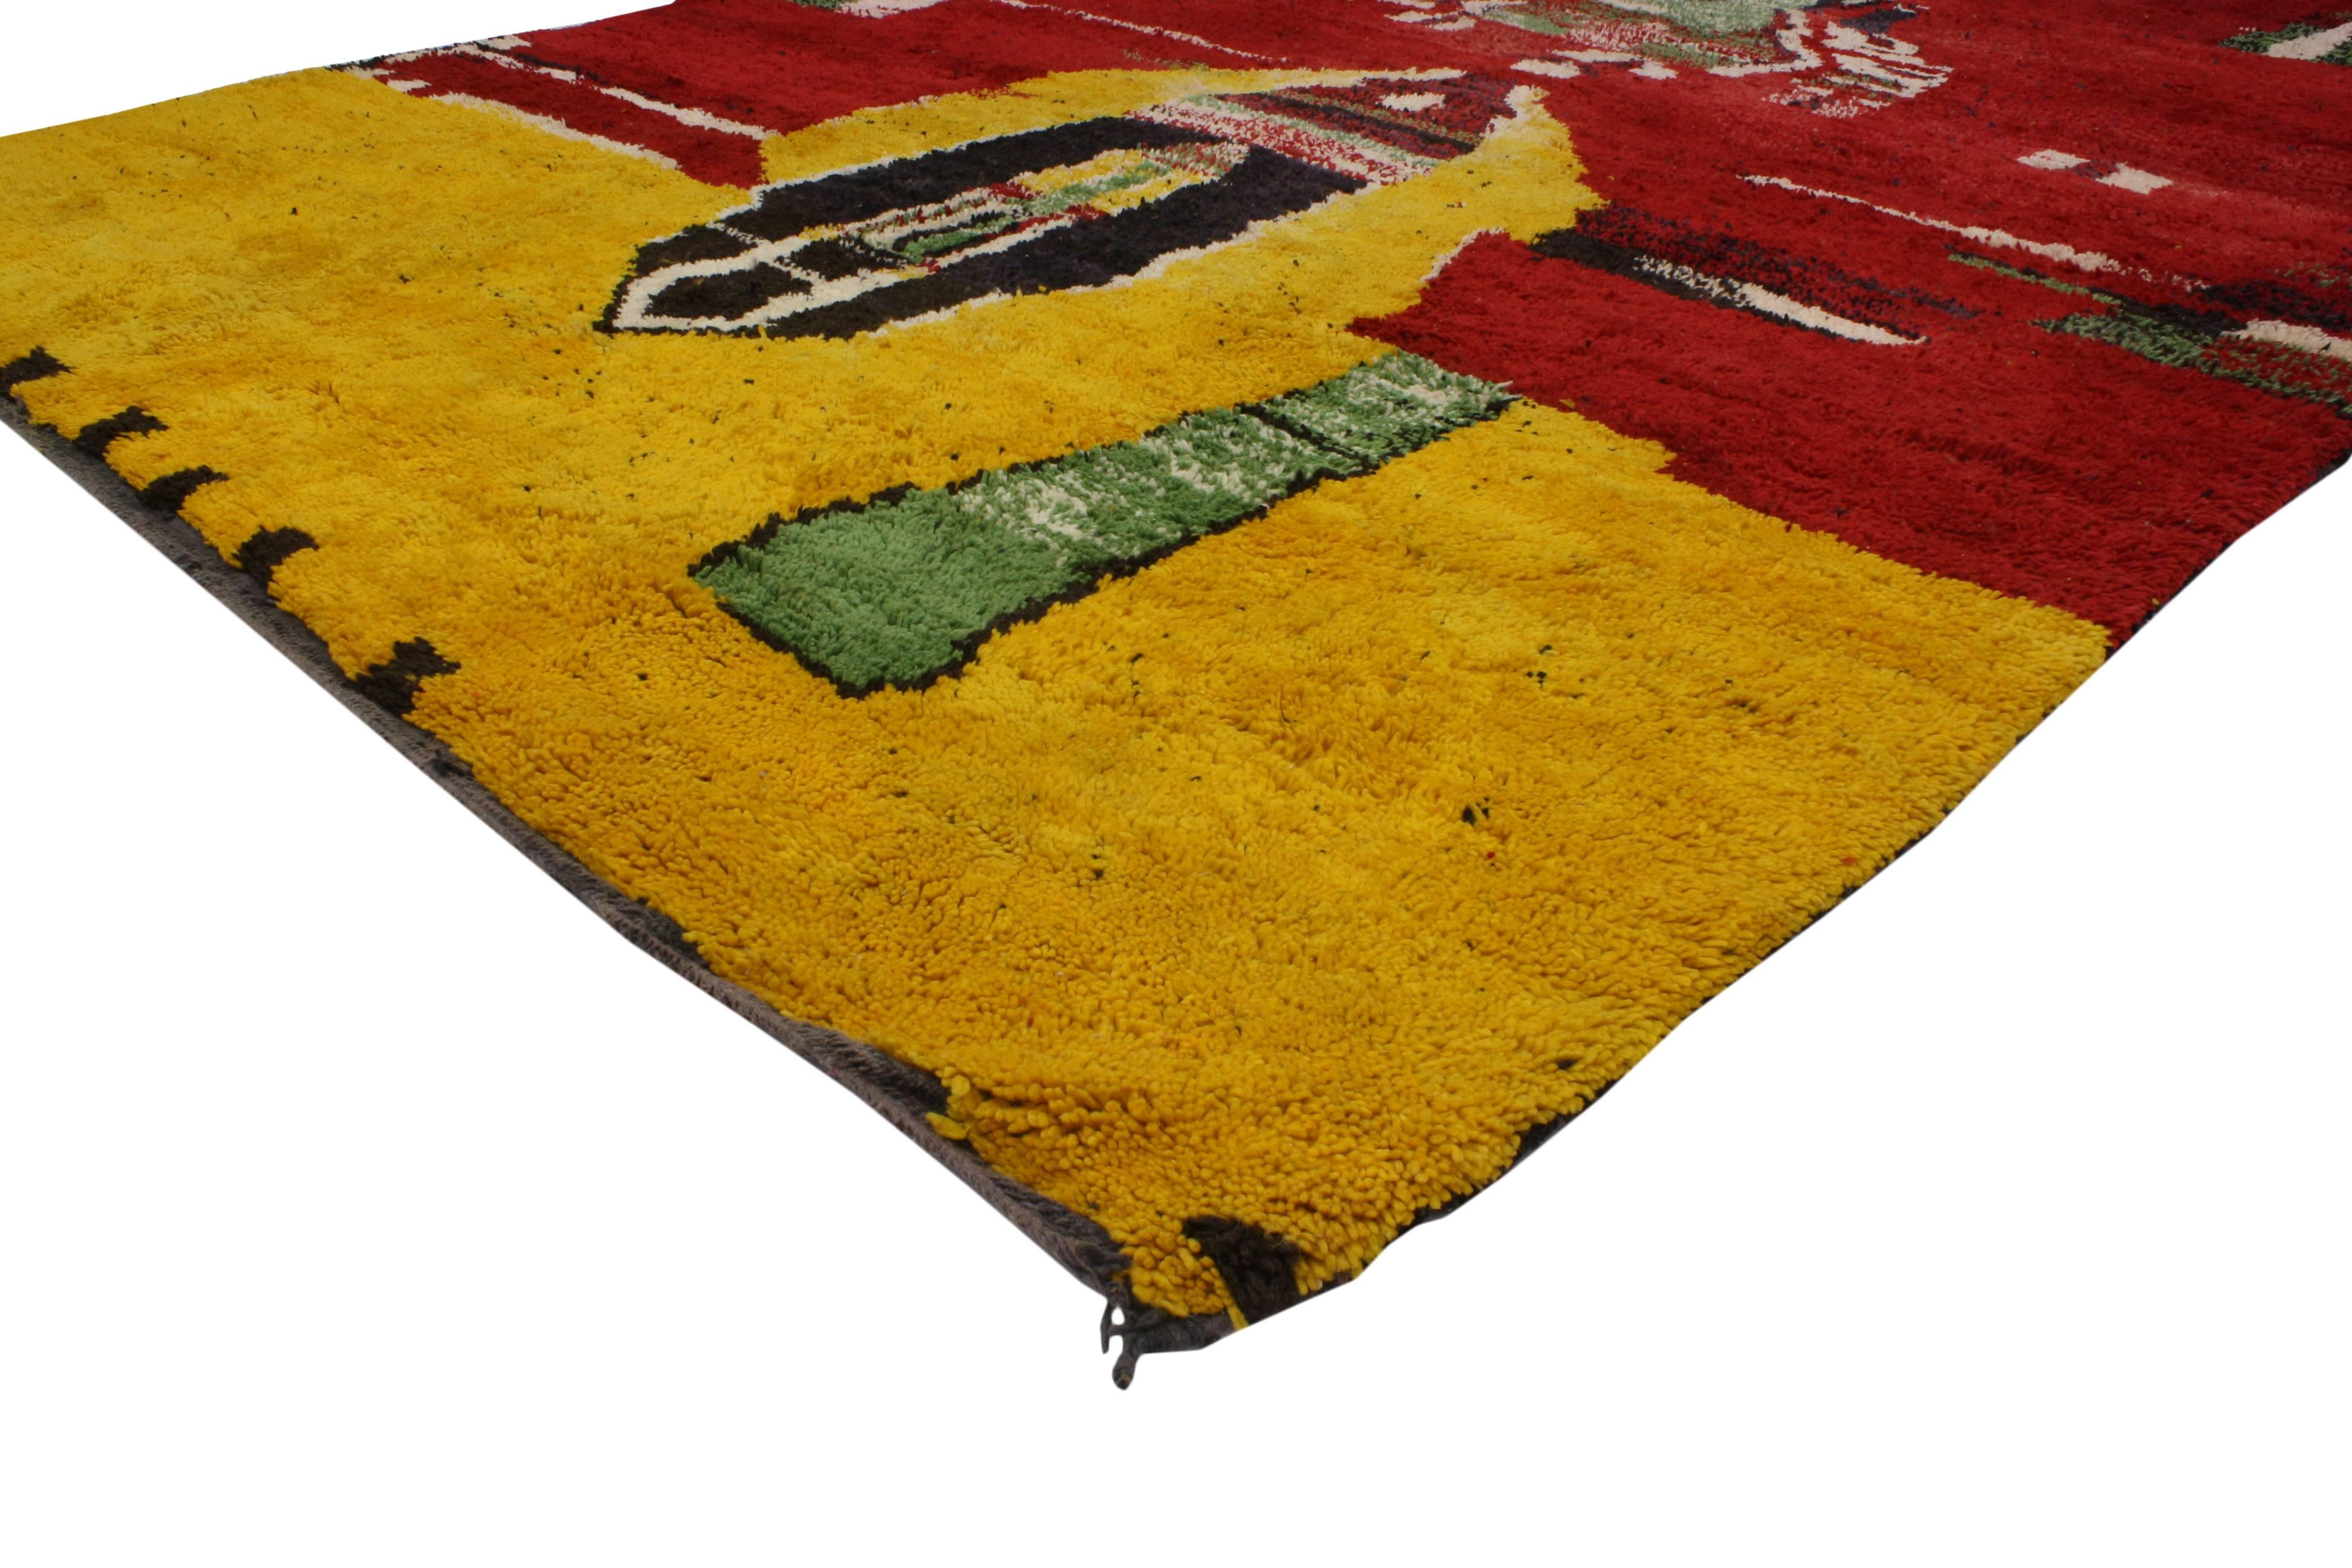 Contemporary abstract style with a tribal twist. This Berber Moroccan rug comes alive with its saturated red and yellow background, contrasting beautifully with the black, white and green tribal design. Freshen up your space and inject color with